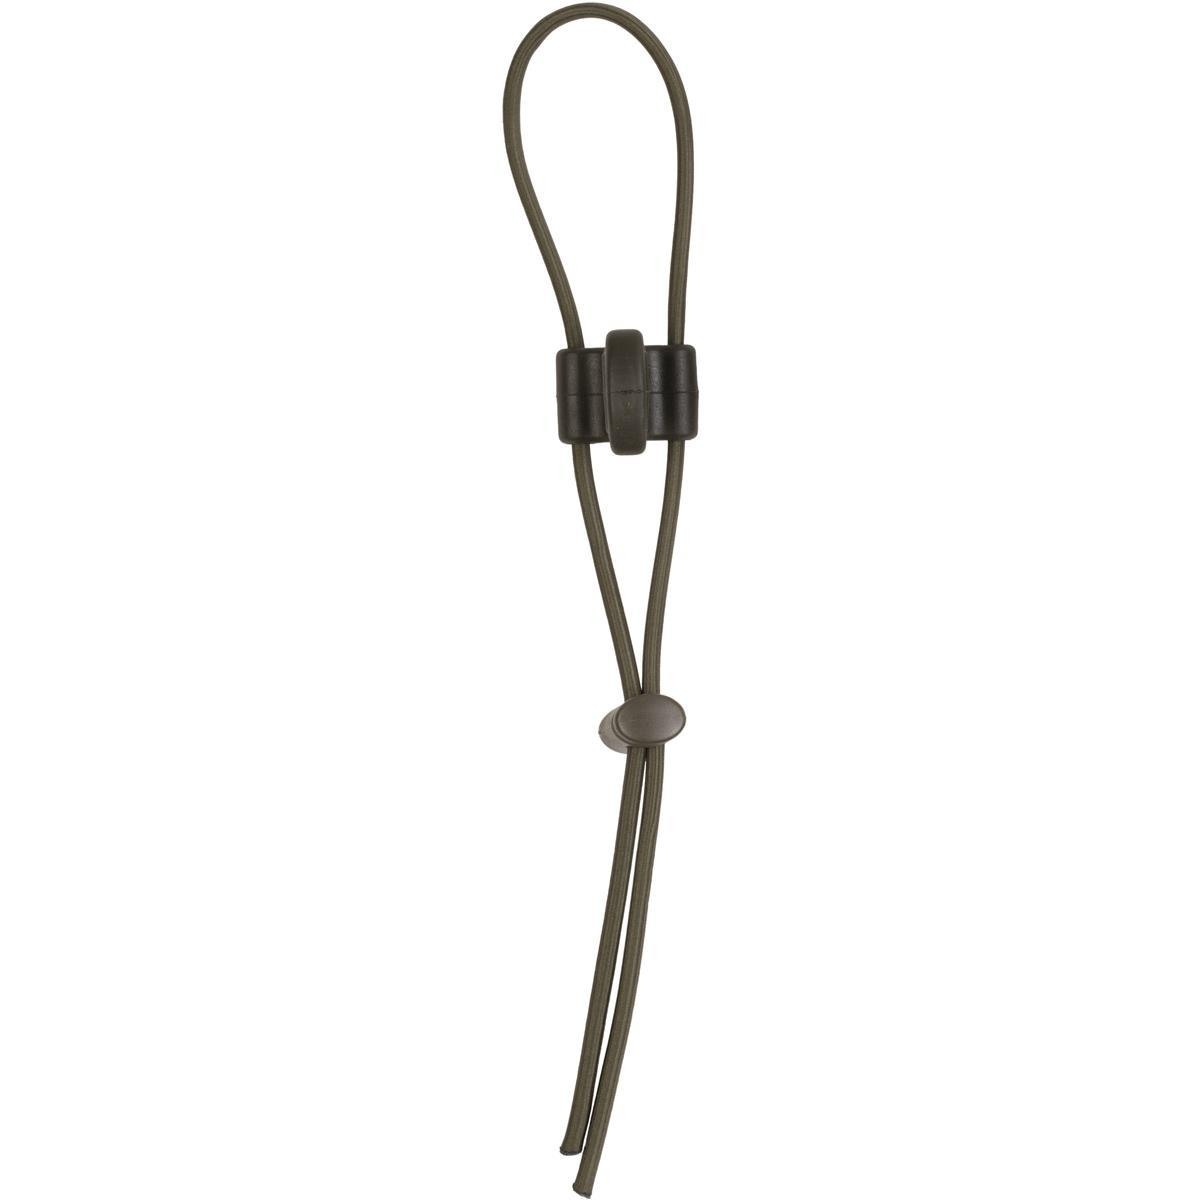 T.A.C.S. bungy rubber safety-catch OD Green